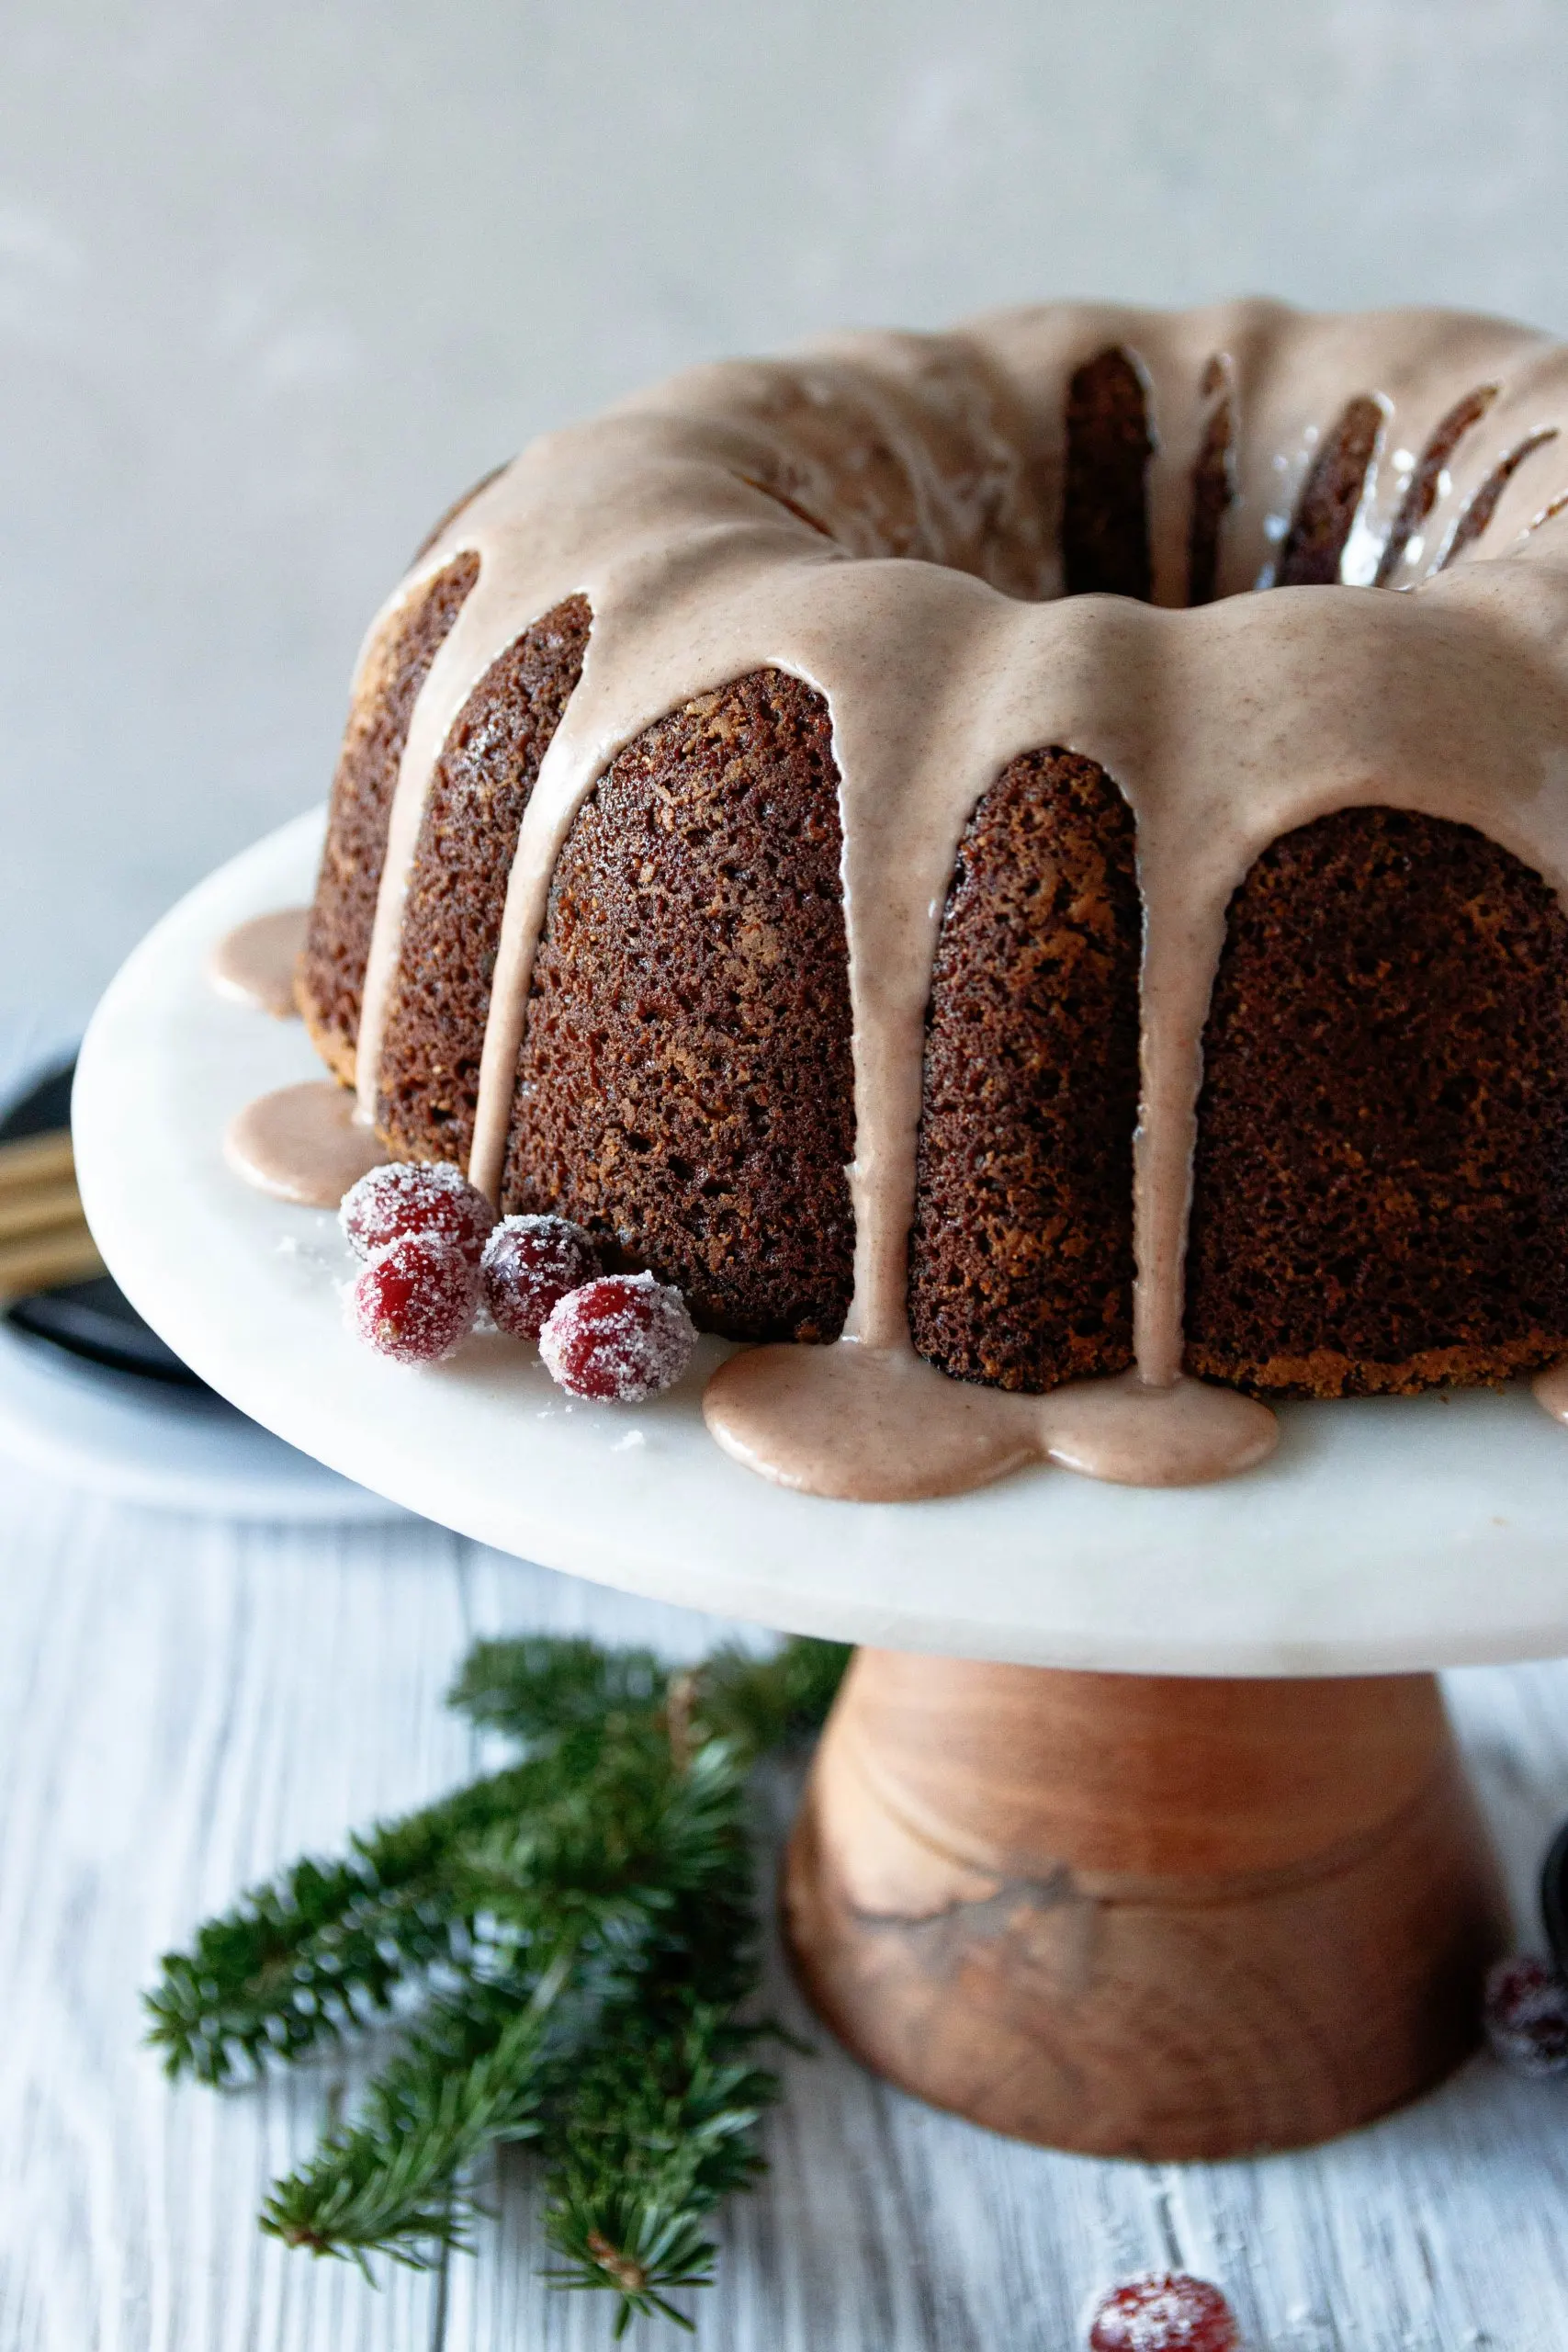 angled picture of the bundt cake to show the glaze and rich color